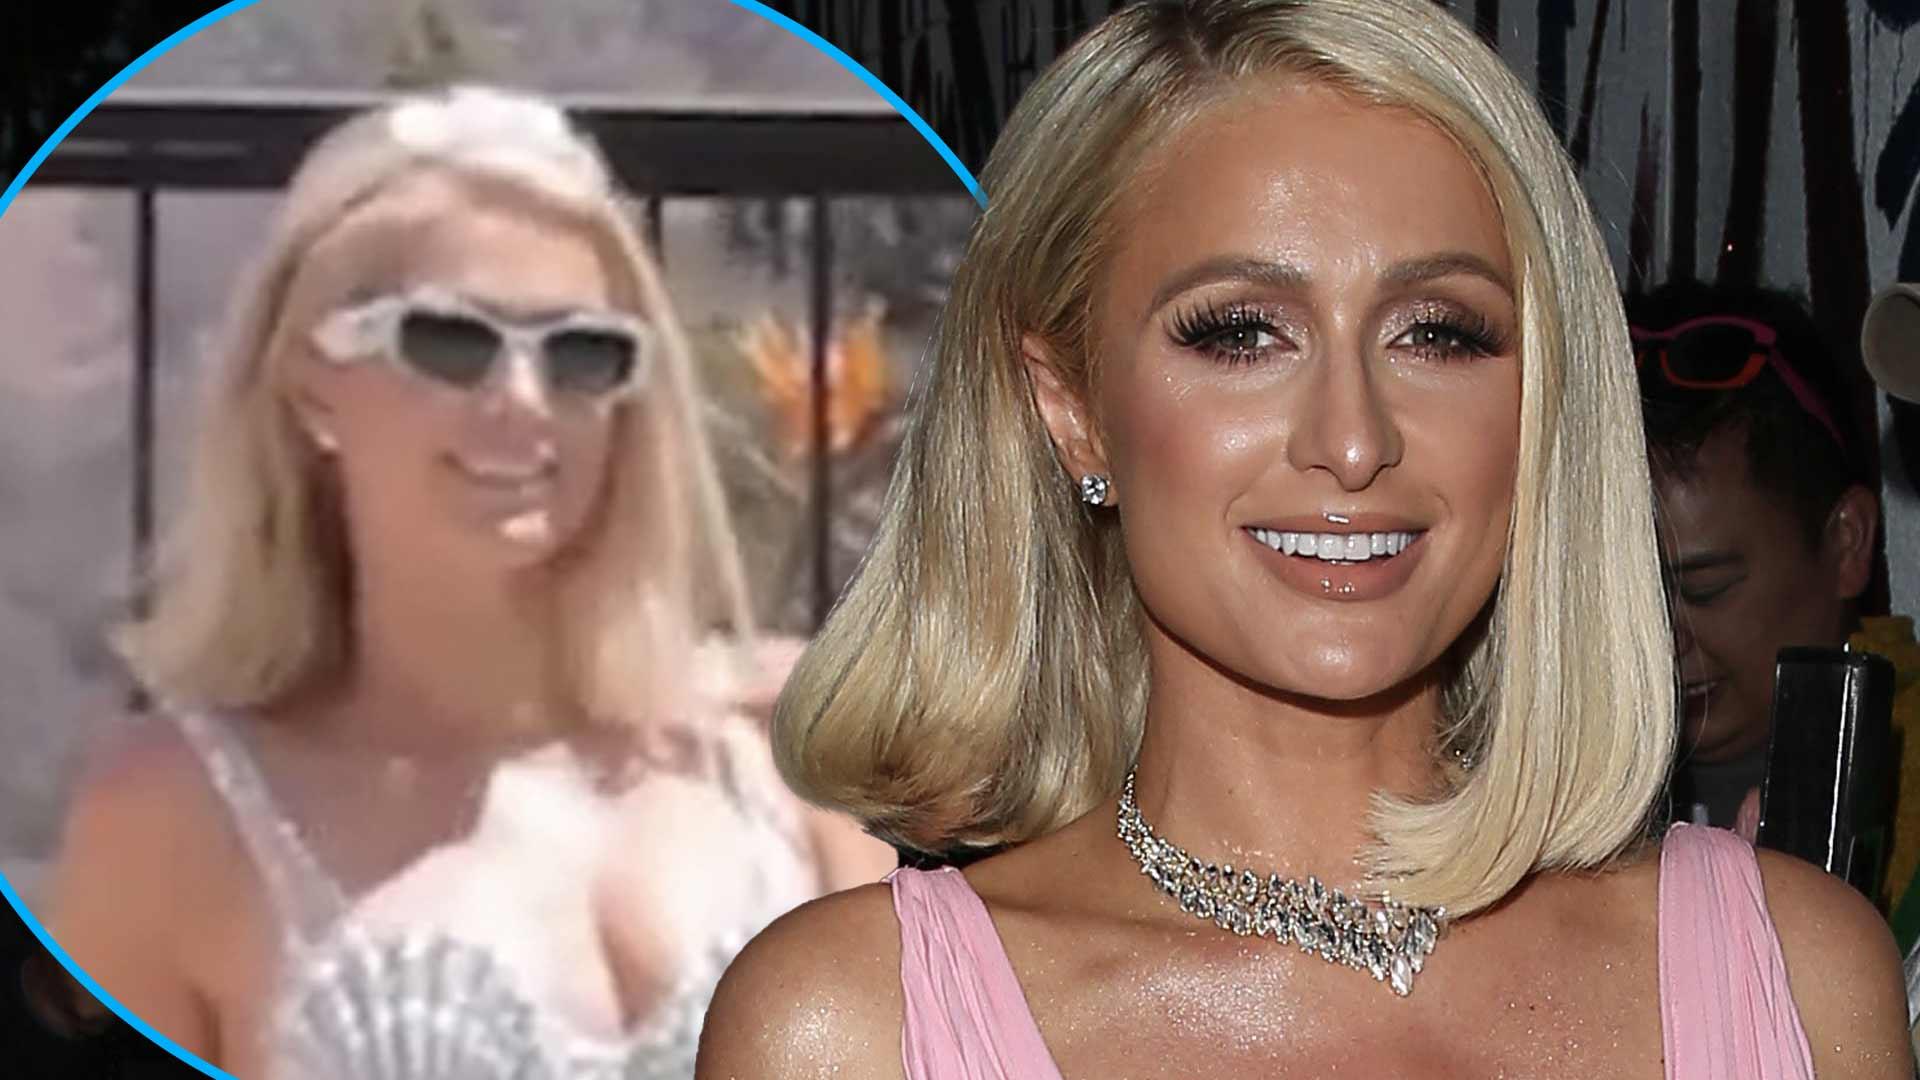 Paris Hilton Transforms Into a Beautiful Blonde Mermaid In ‘Authentic Self’ Affirmation Video